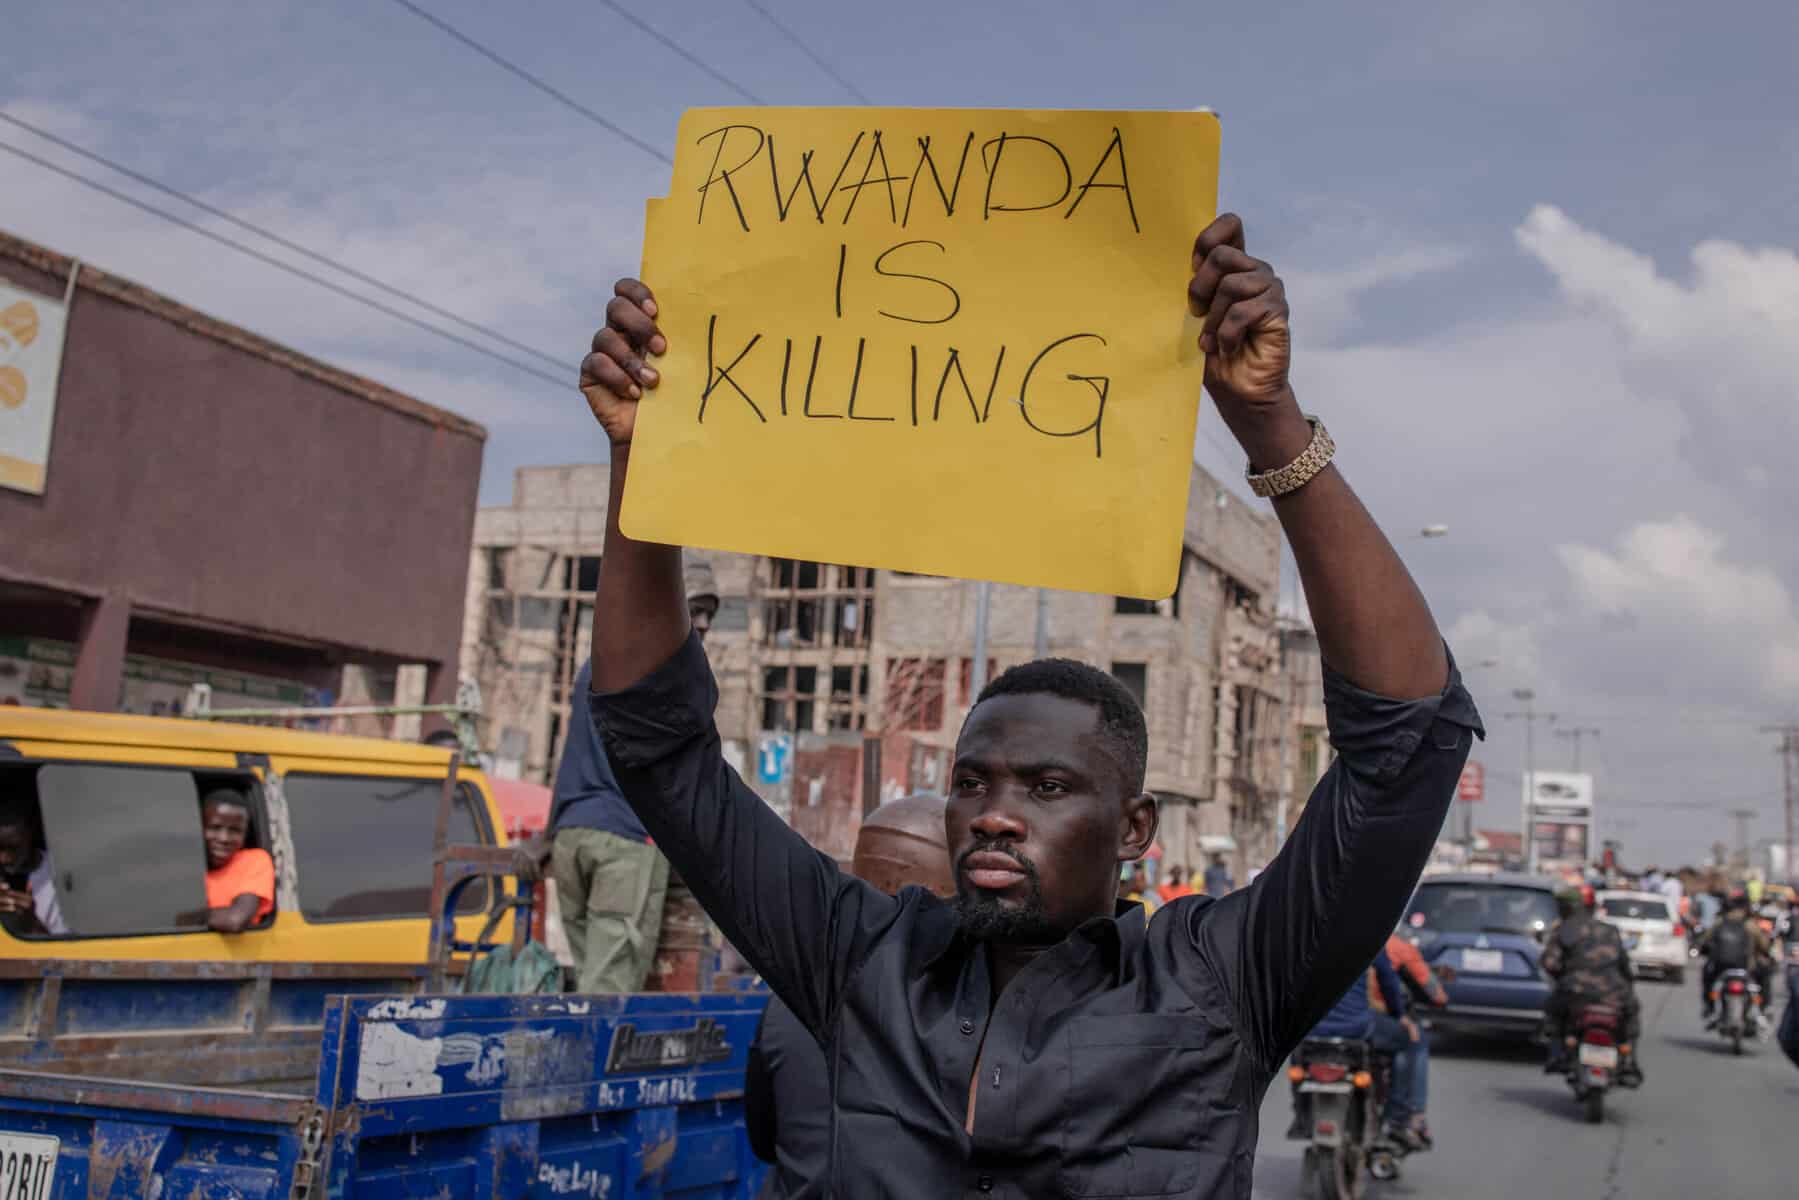 Protests against Rwanda, West in key DR Congo city